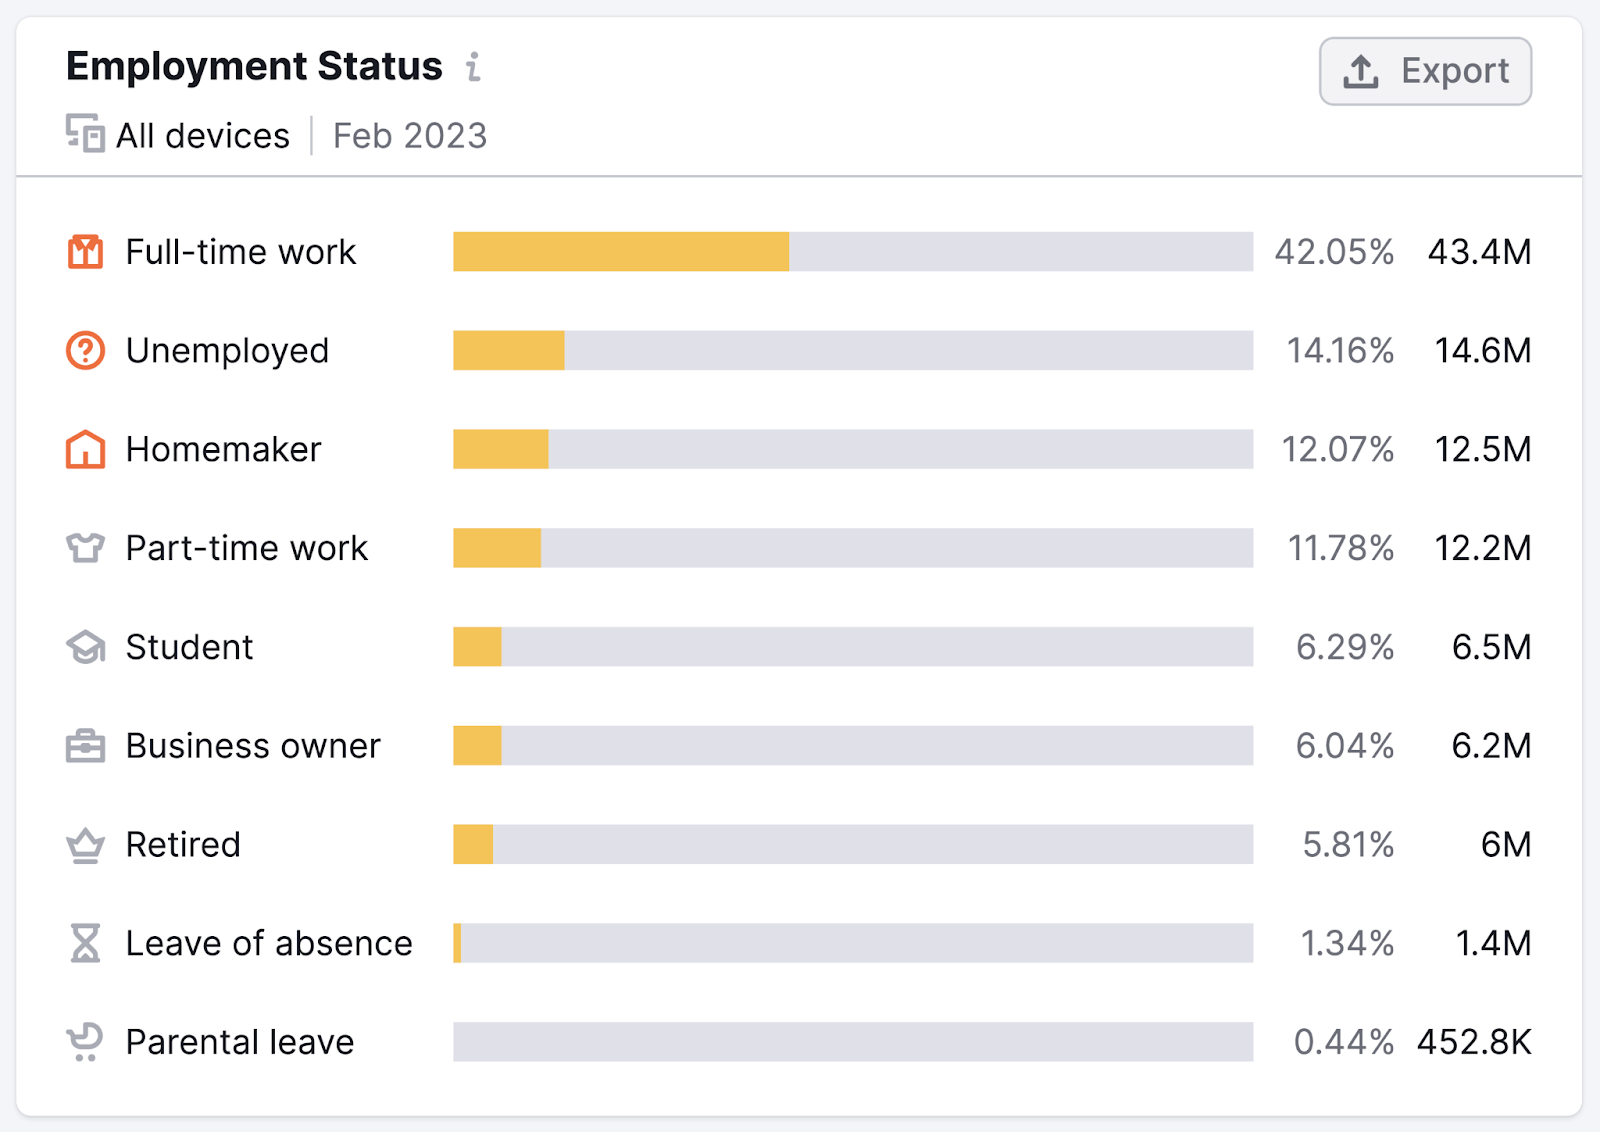 Employment status overview